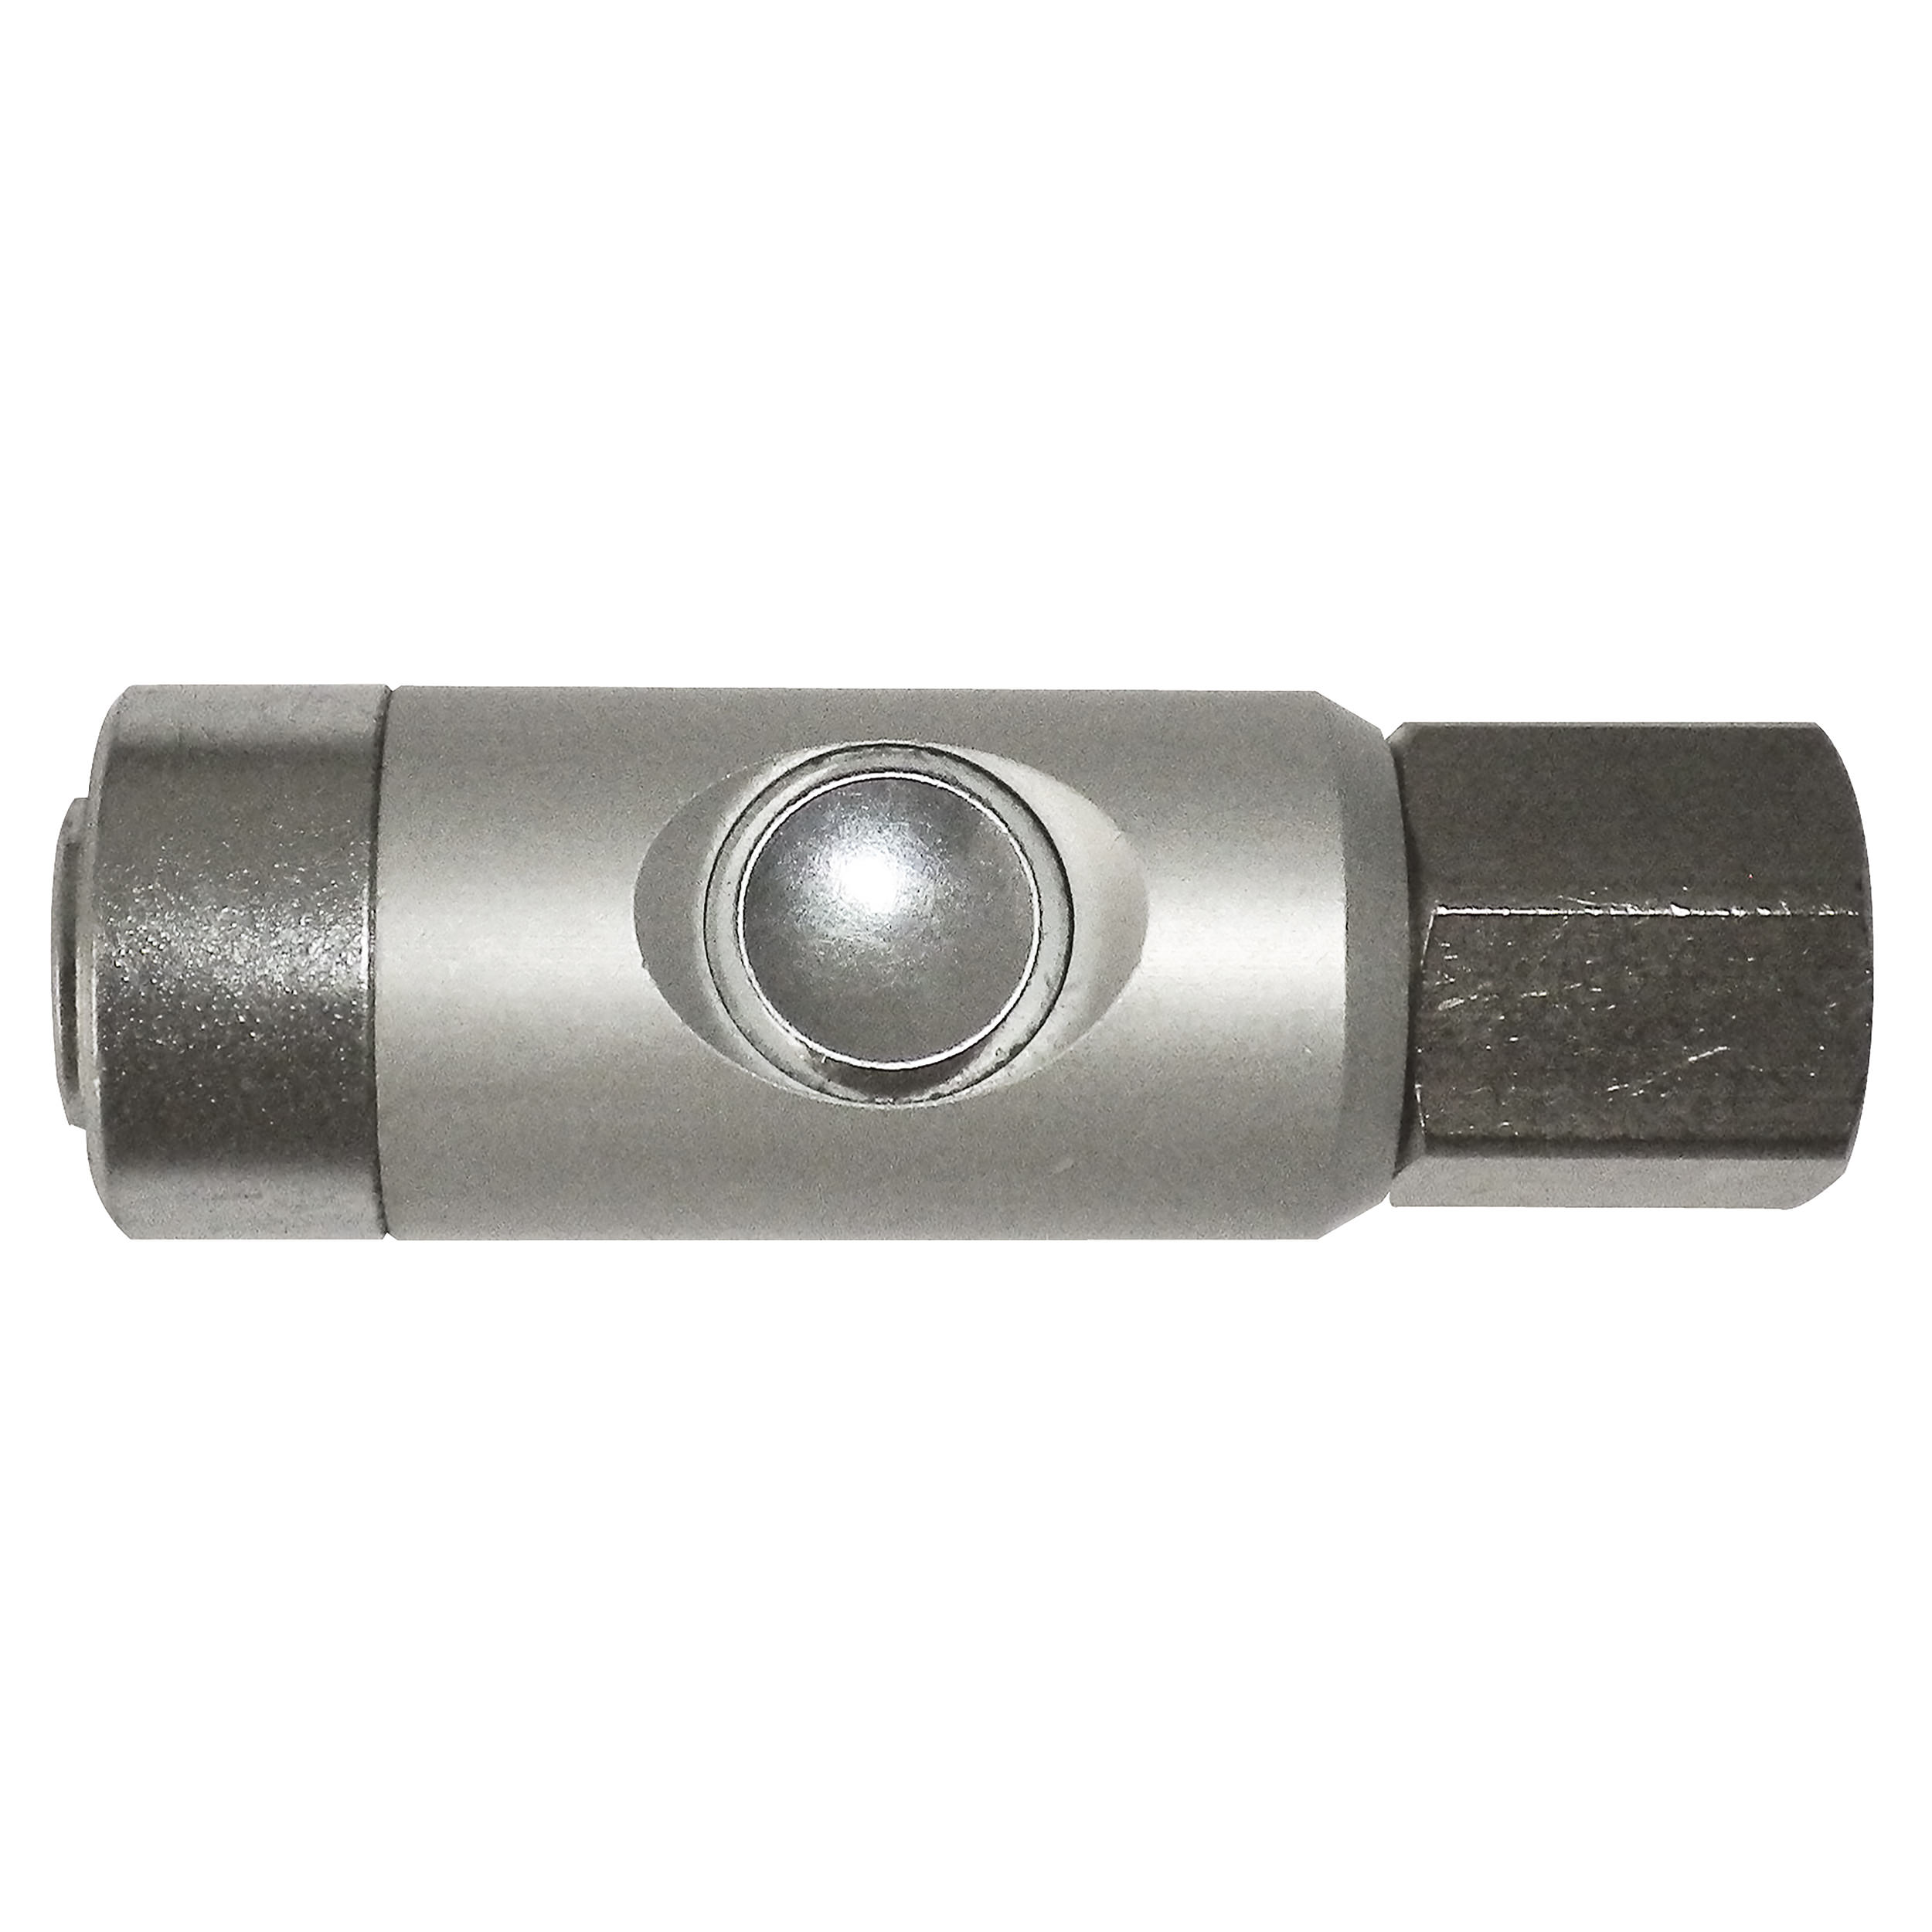 DN 5.5 safety coupling w. ARO profile, w. push button, QN: 1,000 Nl/min, MOP: 145 psi, G½ female, length: 79 mm, AF 20